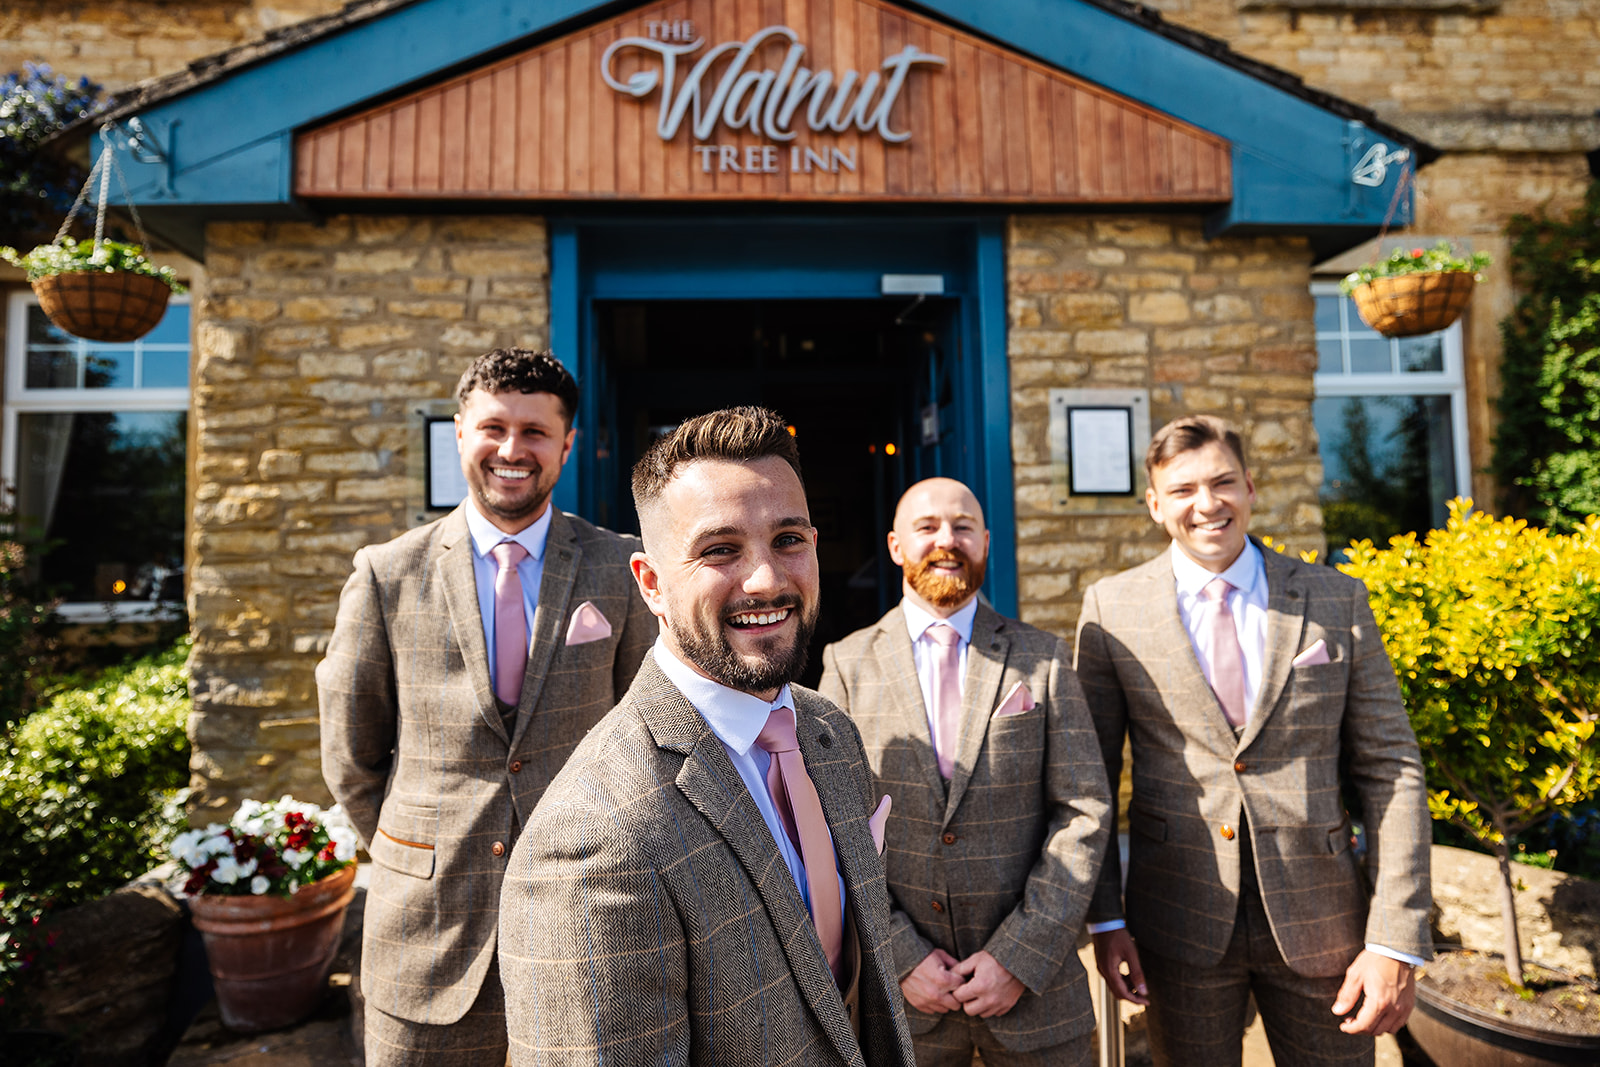 Groom and groomsmen outside The Walnut Three Inn in brown chequered suits with pink ties and pocket squares 